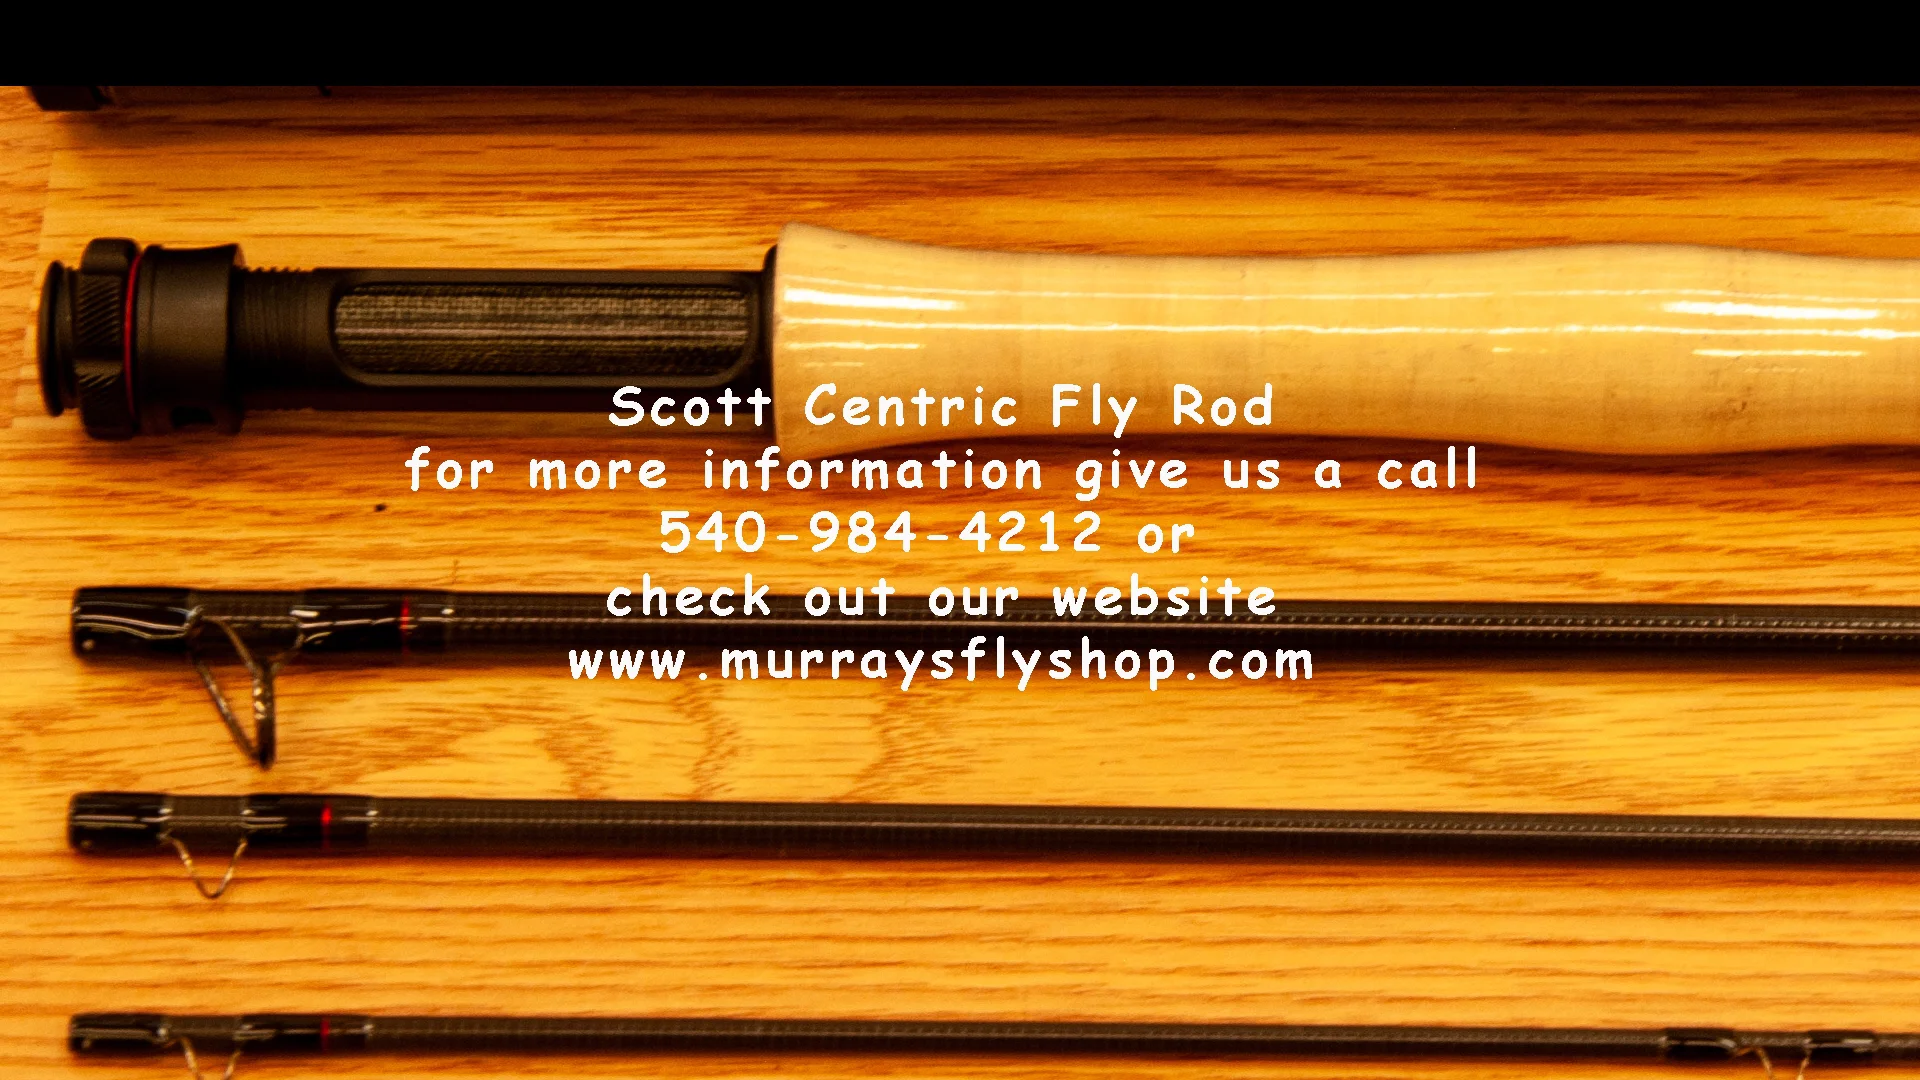 Scott Centric Fly Rod Review with Harry Murray on Vimeo